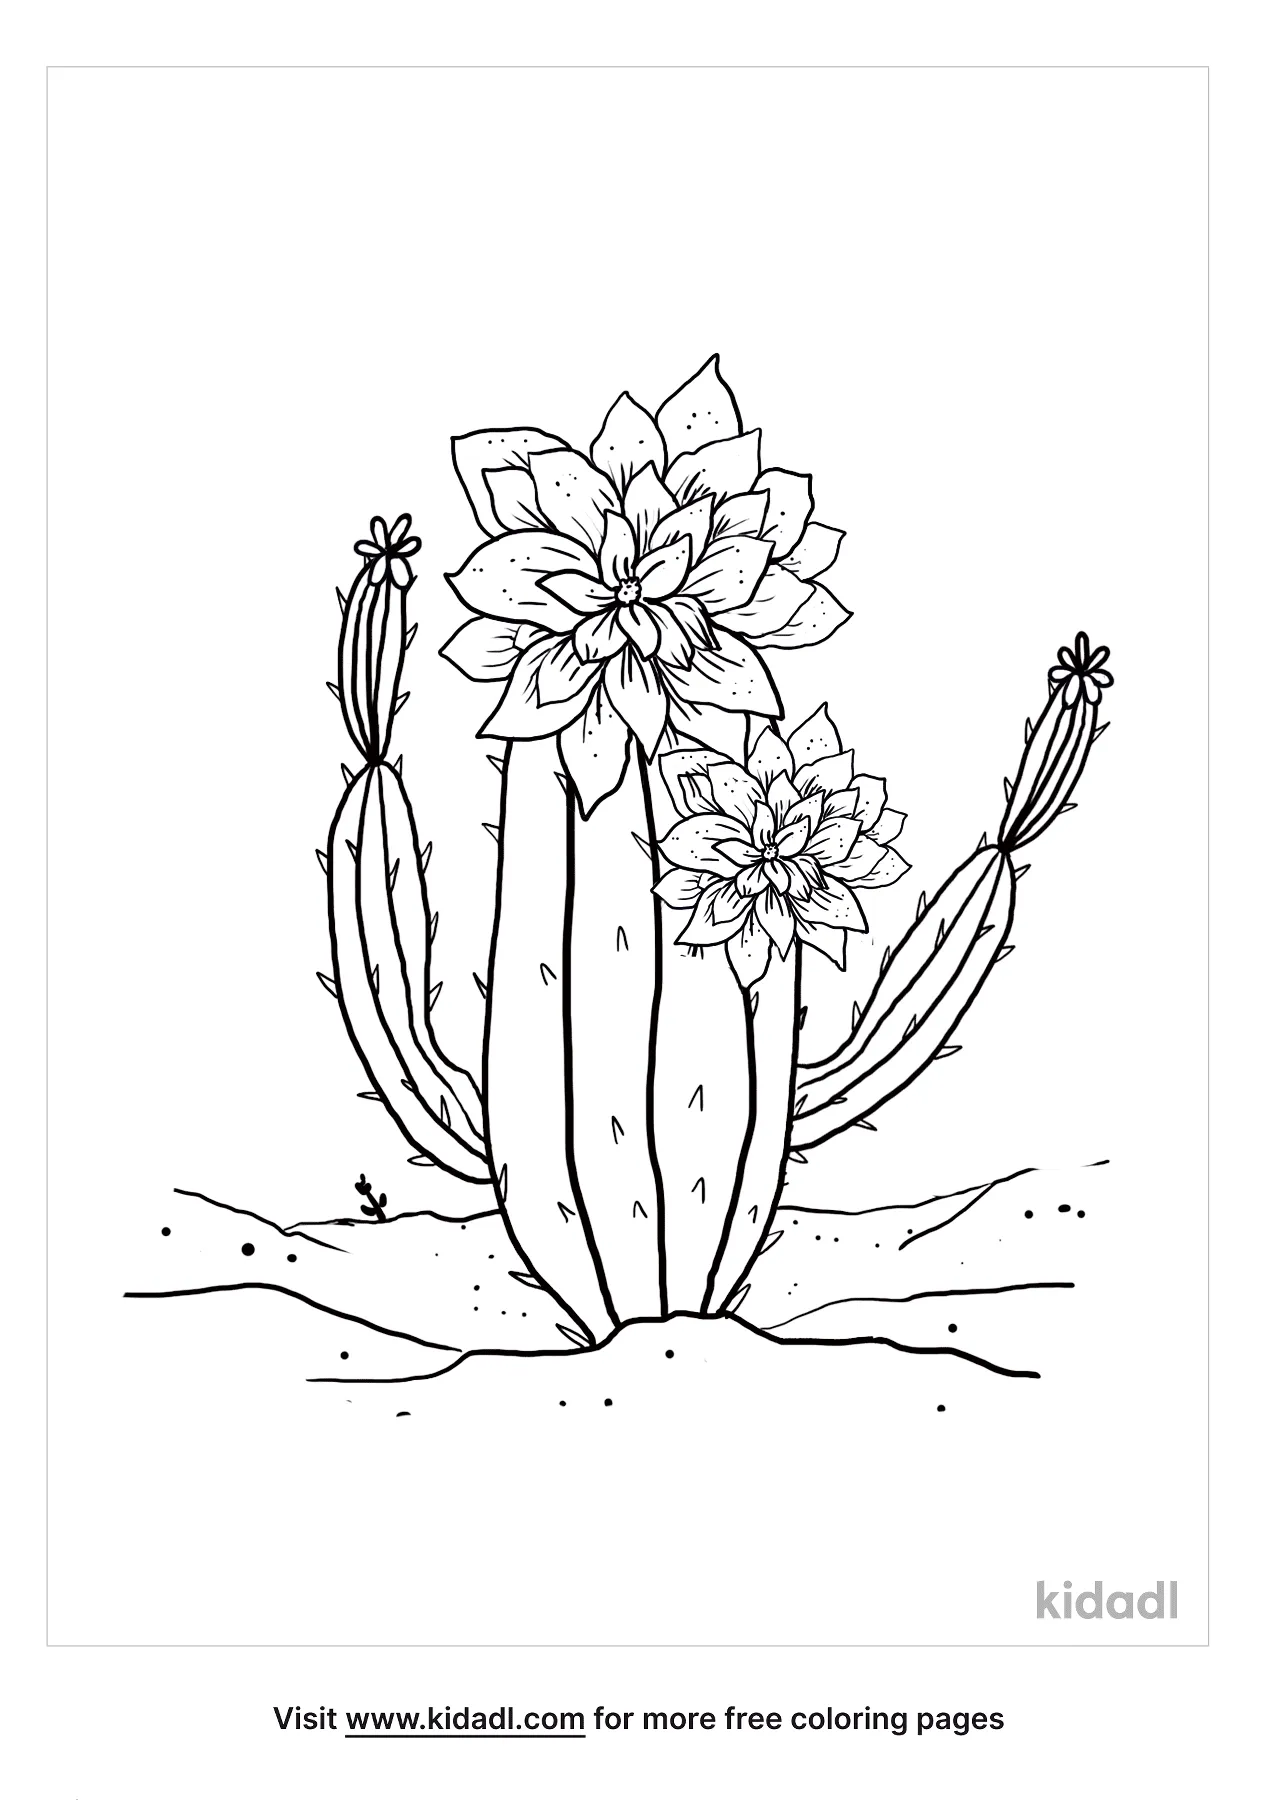 Free Cactus With Bloom Coloring Page | Coloring Page Printables | Kidadl